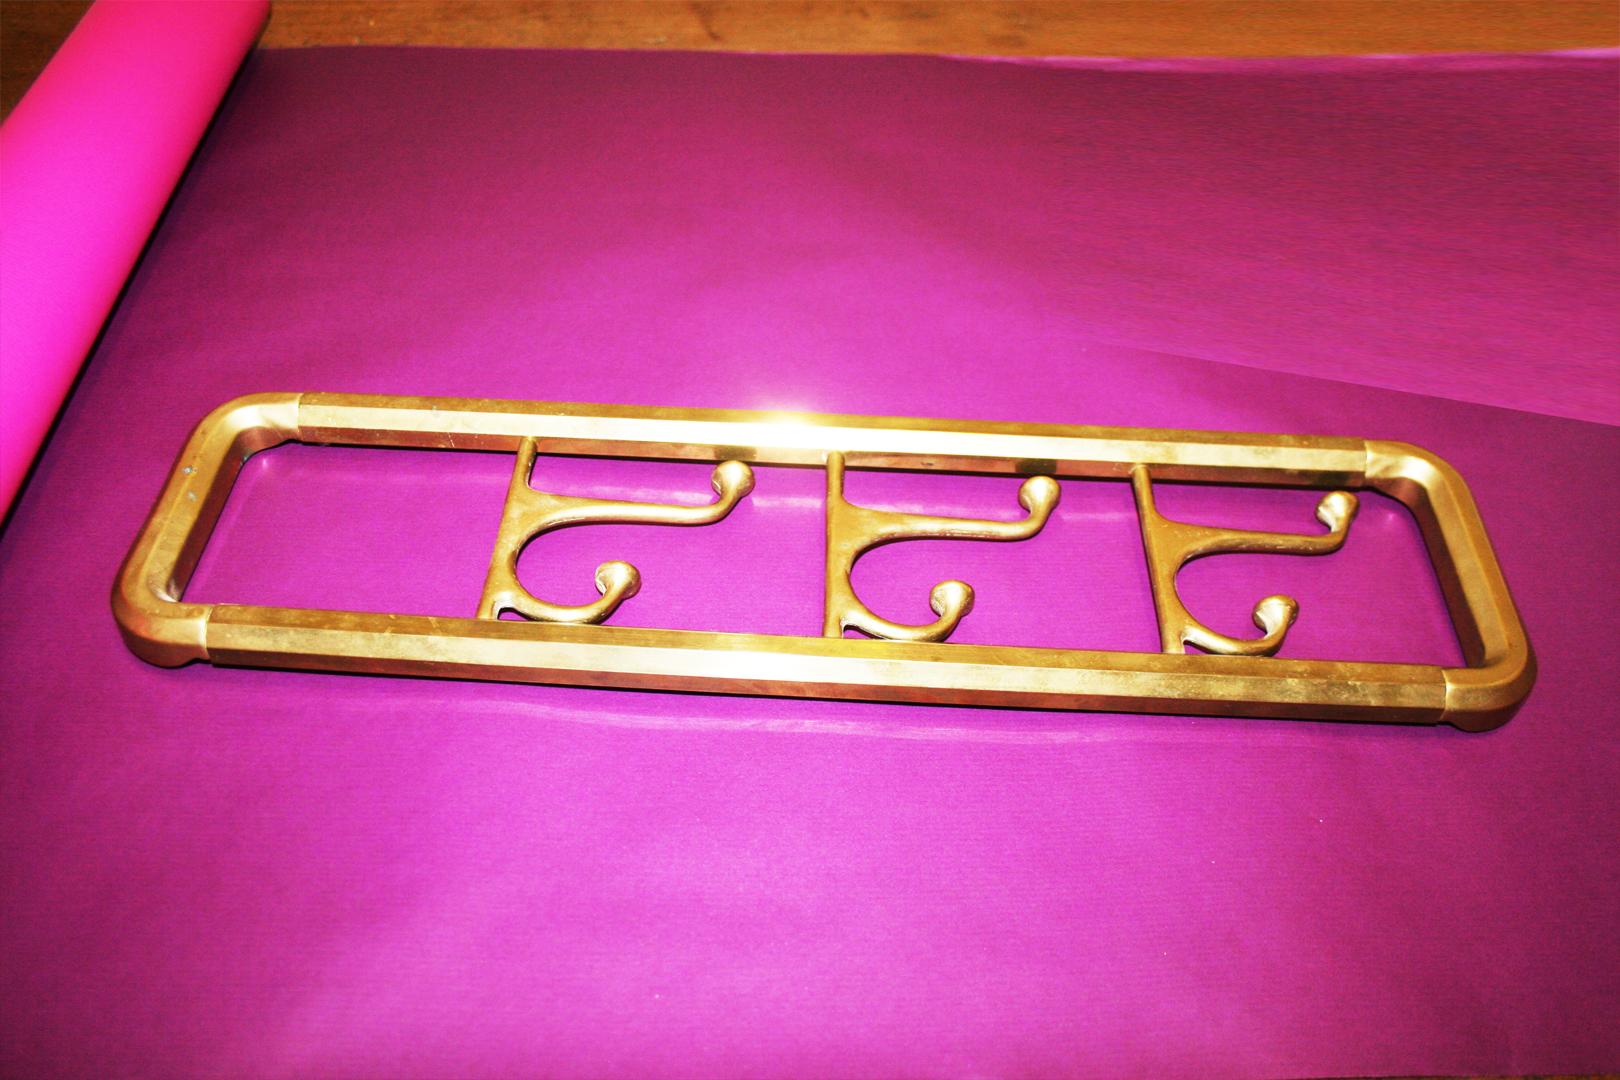 Midcentury / Art Deco foldable wall coat rack in brass

Foldable with three hangers

Very good vintage condition.